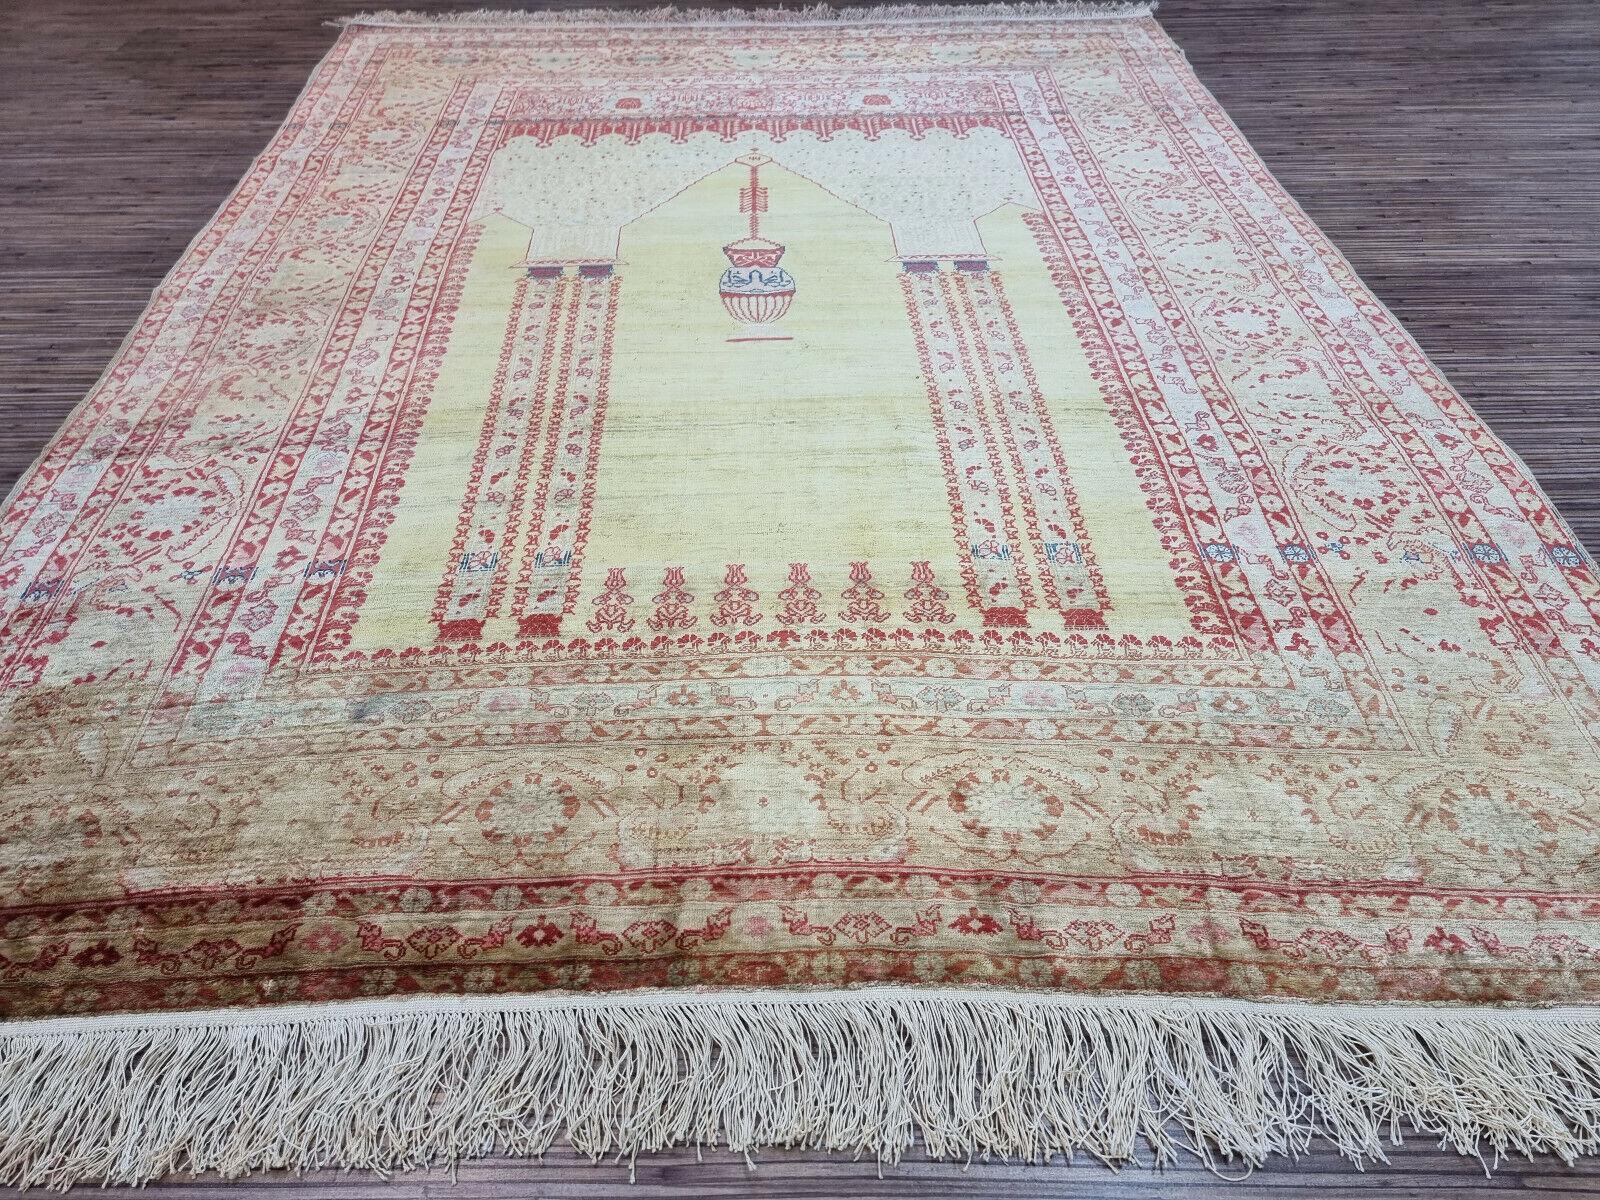 Handmade Antique Persian Style Tabriz Prayer Silk Rug 3.8' x 5', 1880s - 1D84 In Good Condition For Sale In Bordeaux, FR